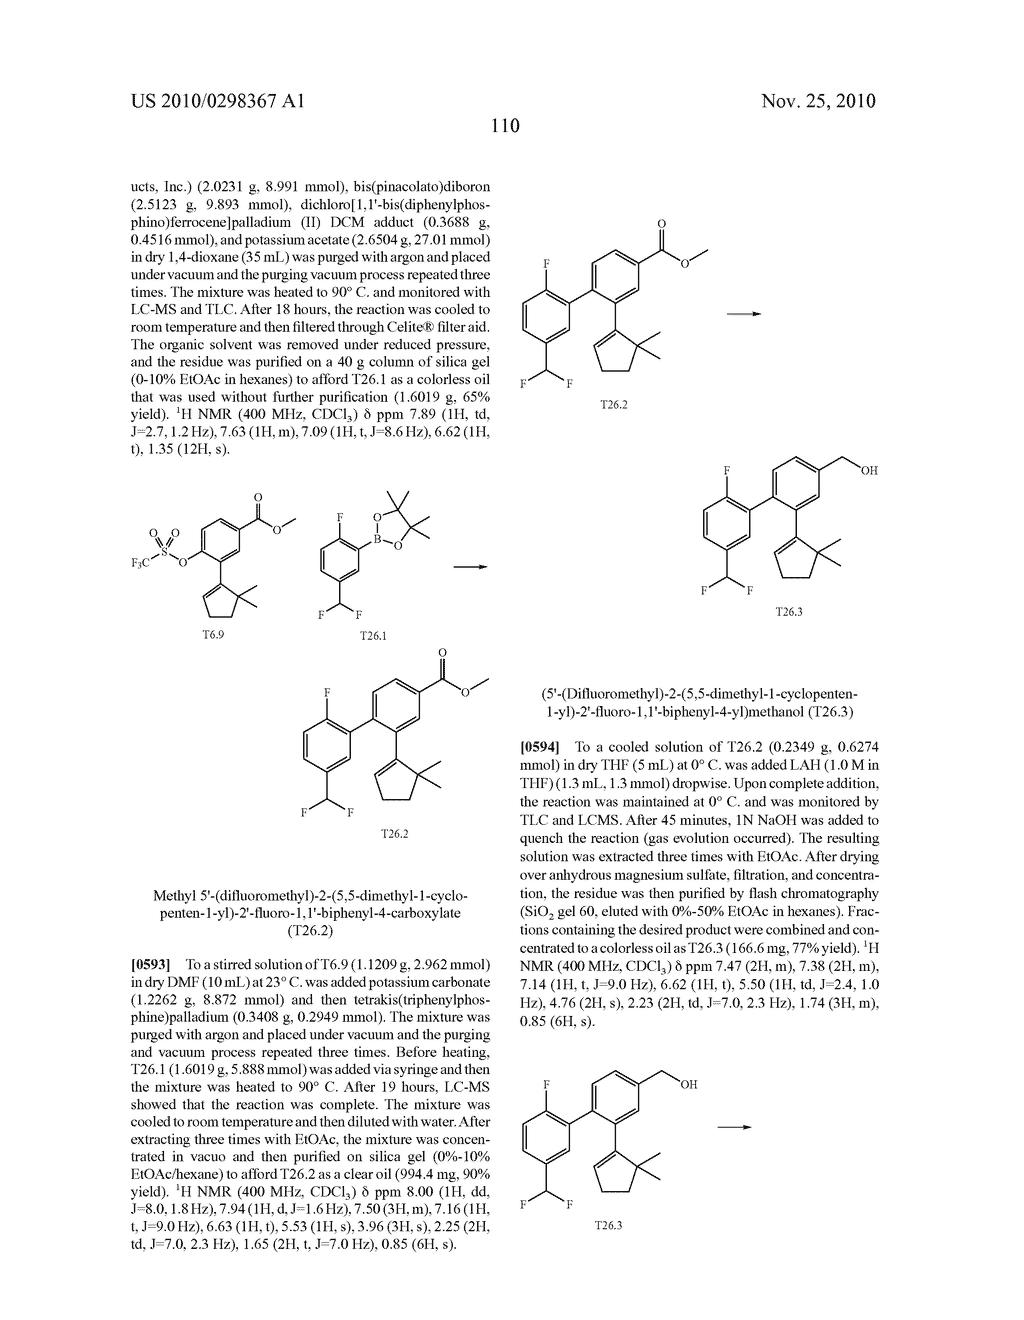 Conformationally Constrained Carboxylic Acid Derivatives Useful for Treating Metabolic Disorders - diagram, schematic, and image 112